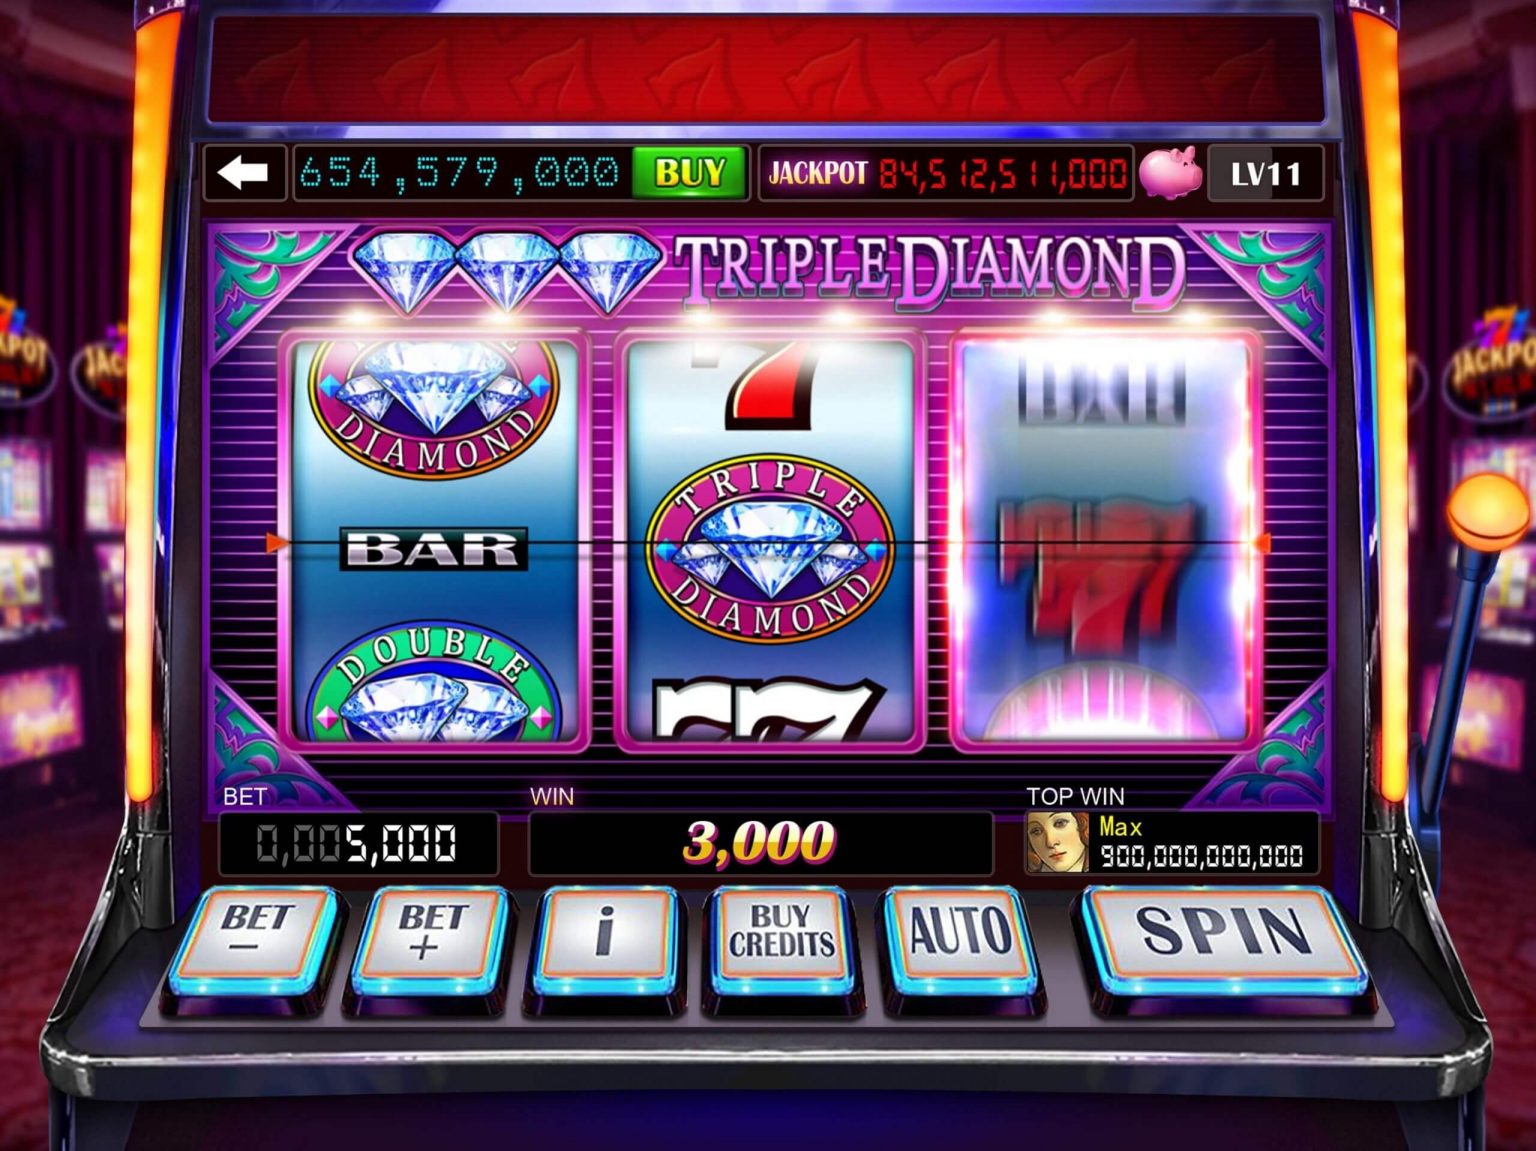 Play Slots And Win Real Money Casinos Will Enrich Your Gaming Experience